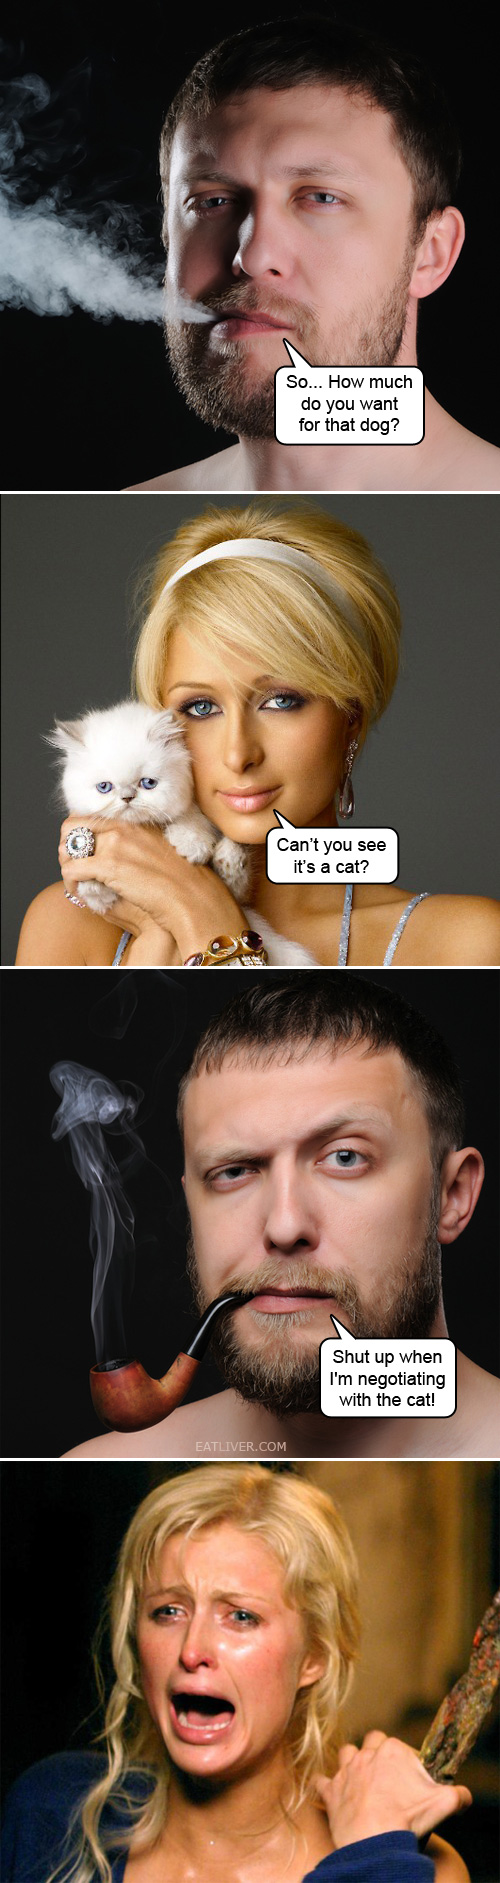 Paris Hilton selling her pussy